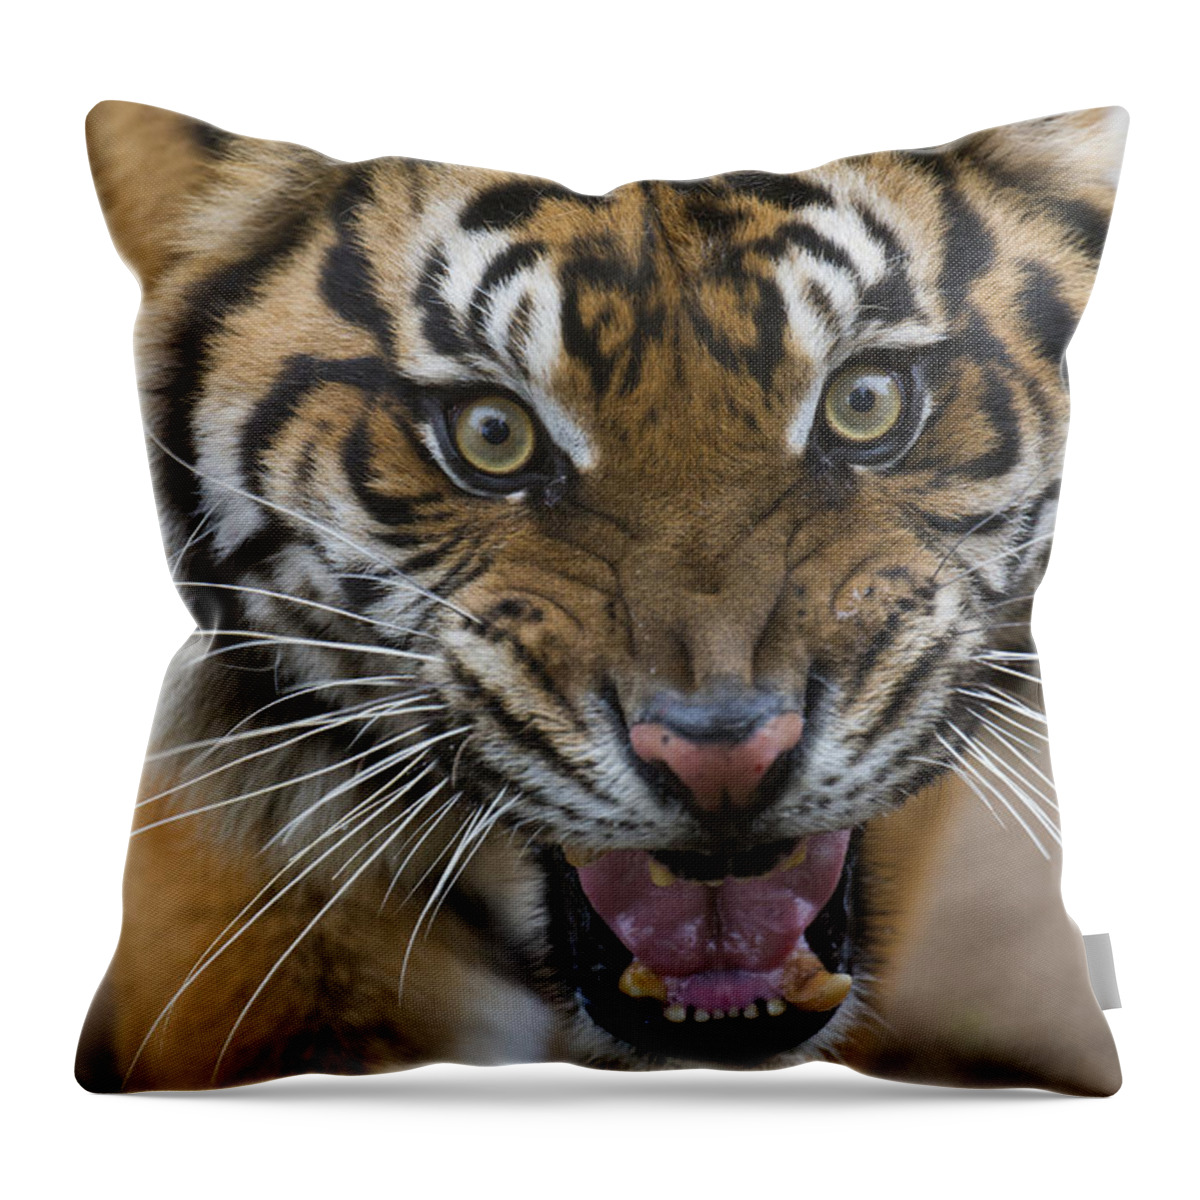 San Diego Zoo Throw Pillow featuring the photograph Sumatran Tiger Male Snarling Native by San Diego Zoo